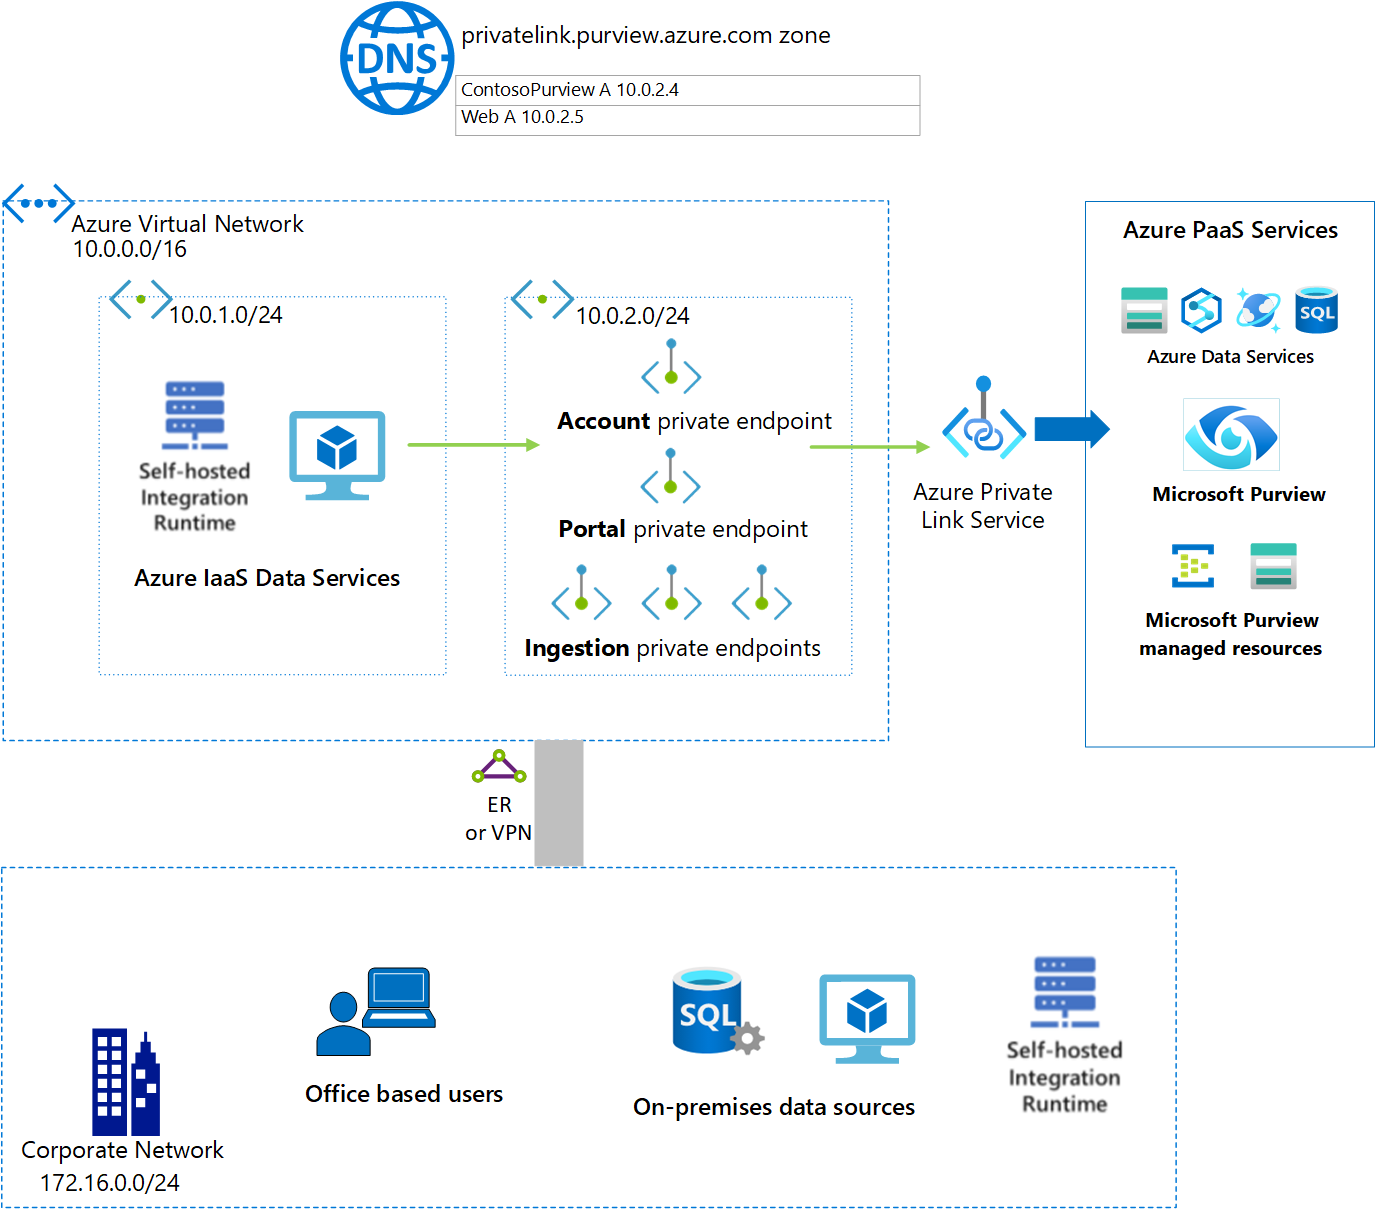 Picture of Azure Purview tools.